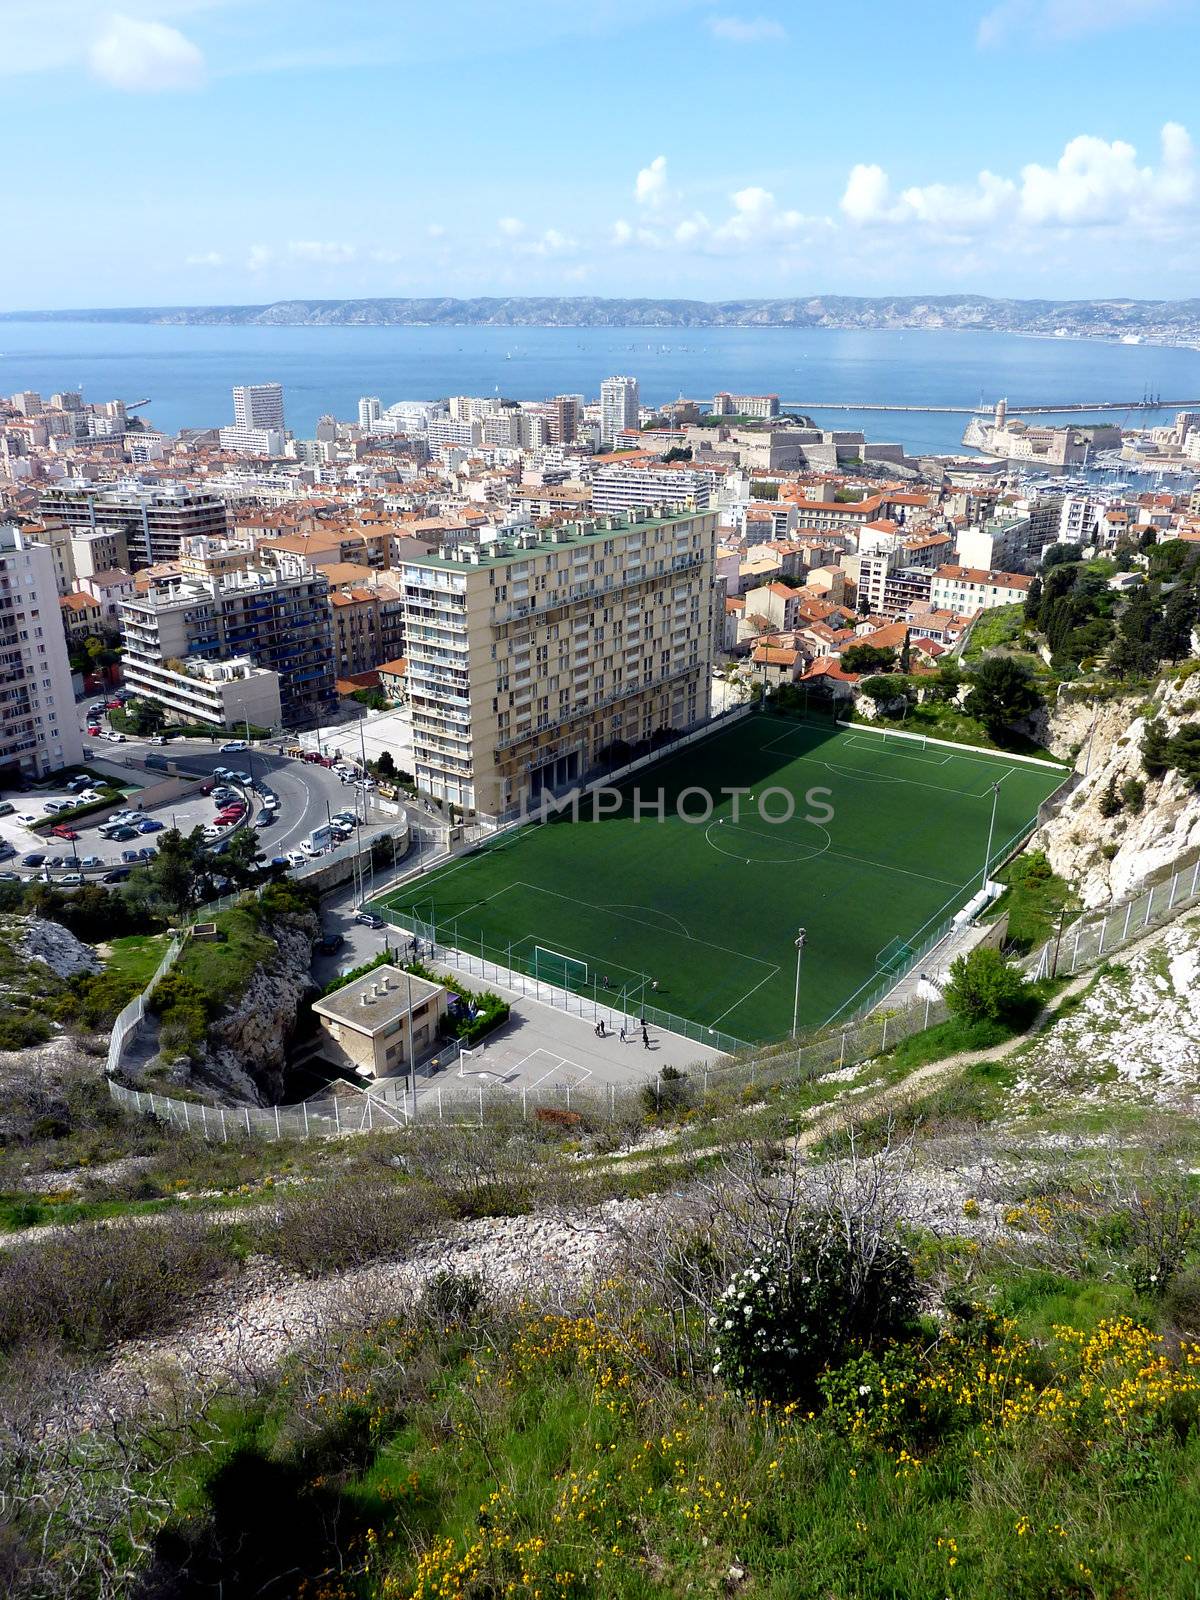 Football pitch in Marseilles, France by Elenaphotos21